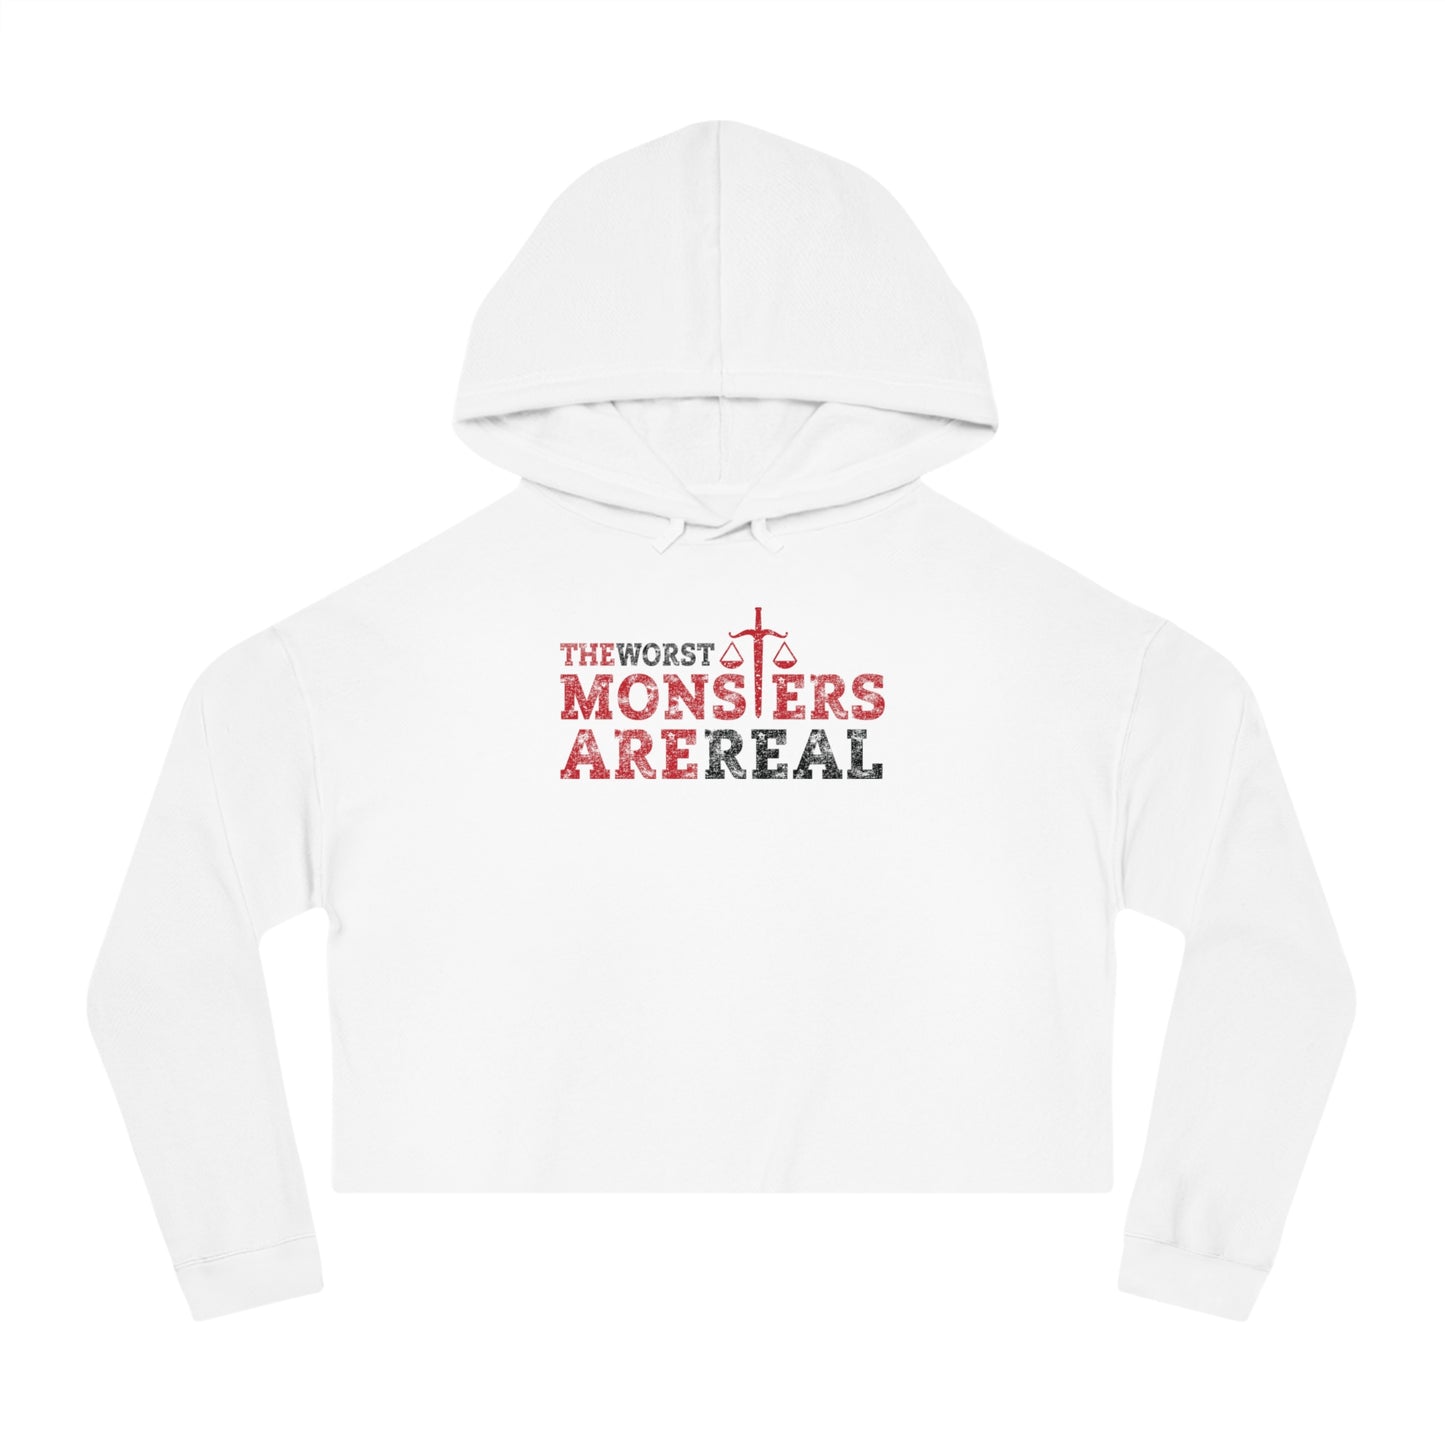 "The Worst Monsters" Cropped Hooded Sweatshirt